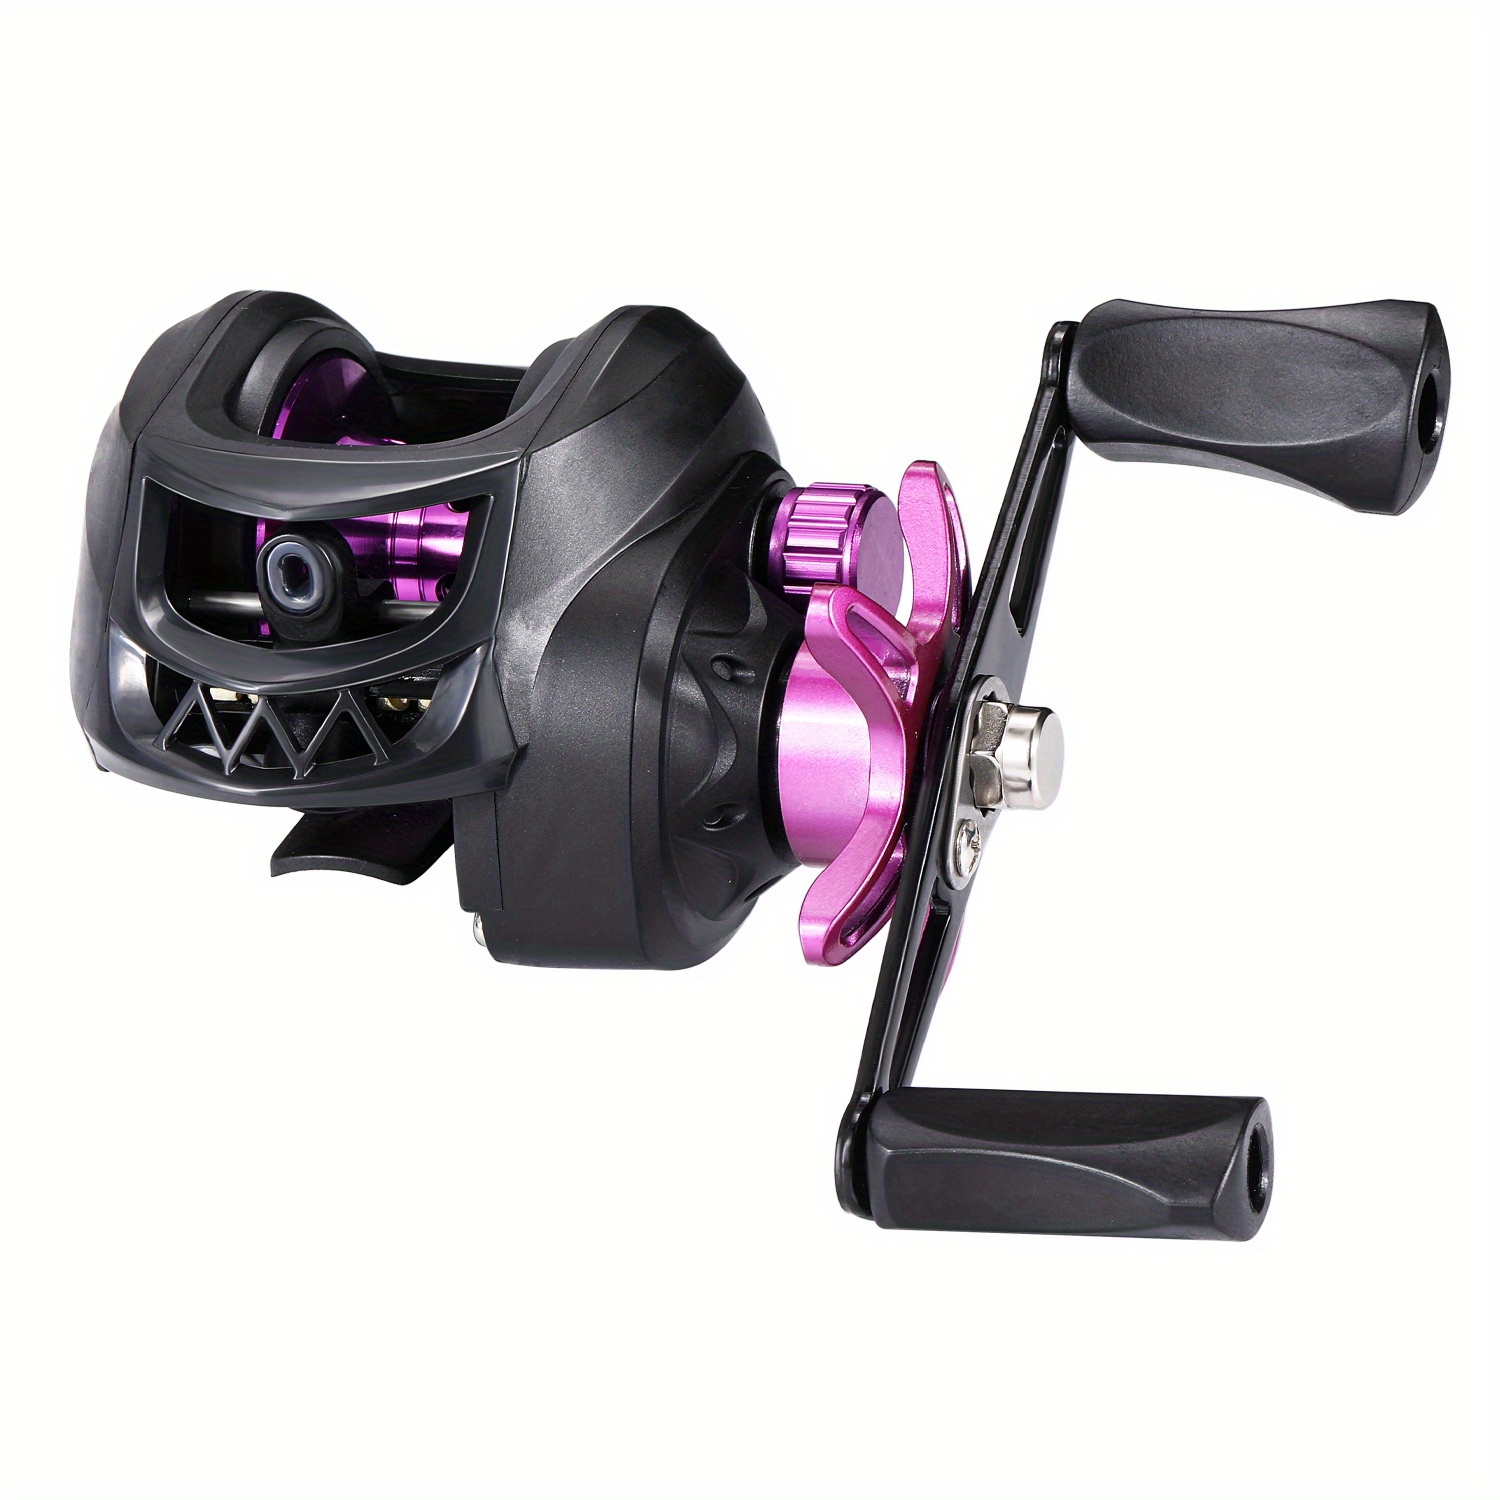  Lightweight Lures Baitcasting Reels Red Bait Casting Fishing  Wheel 7.2:1 Speed Ratio Reel for Raft Fishing, Lake Fishing, Sea Fishing,  and Rock Fishing (HP10, Left Hand) : Sports & Outdoors